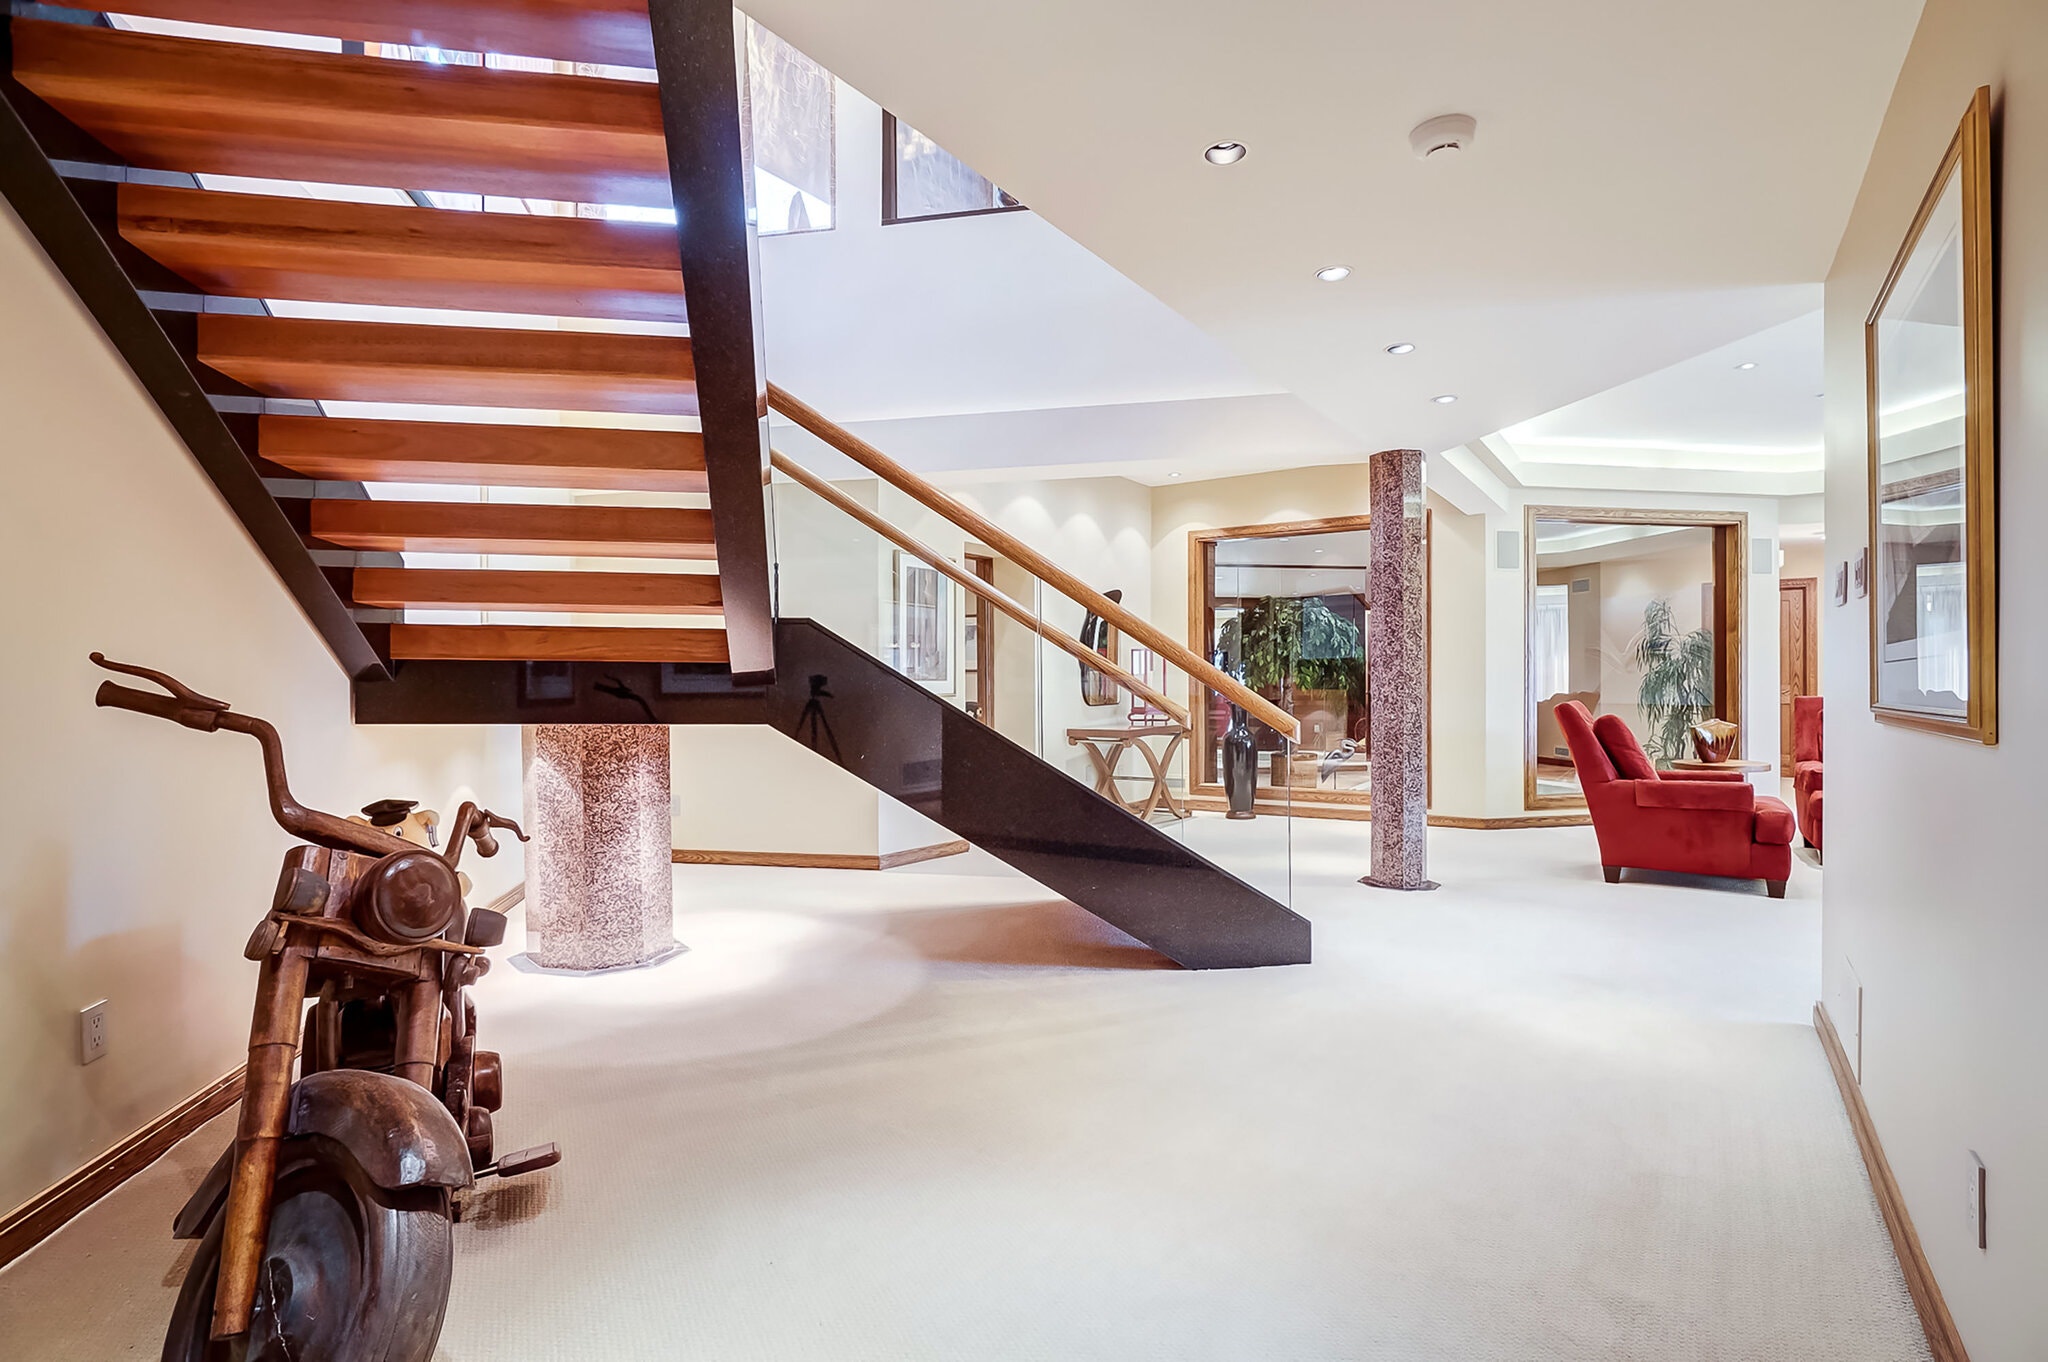 A floating staircase leads down to the lower level, which has a media room, wet bar and gym. Tall glass doors open to expansive green space and vistas of the Rideau River.